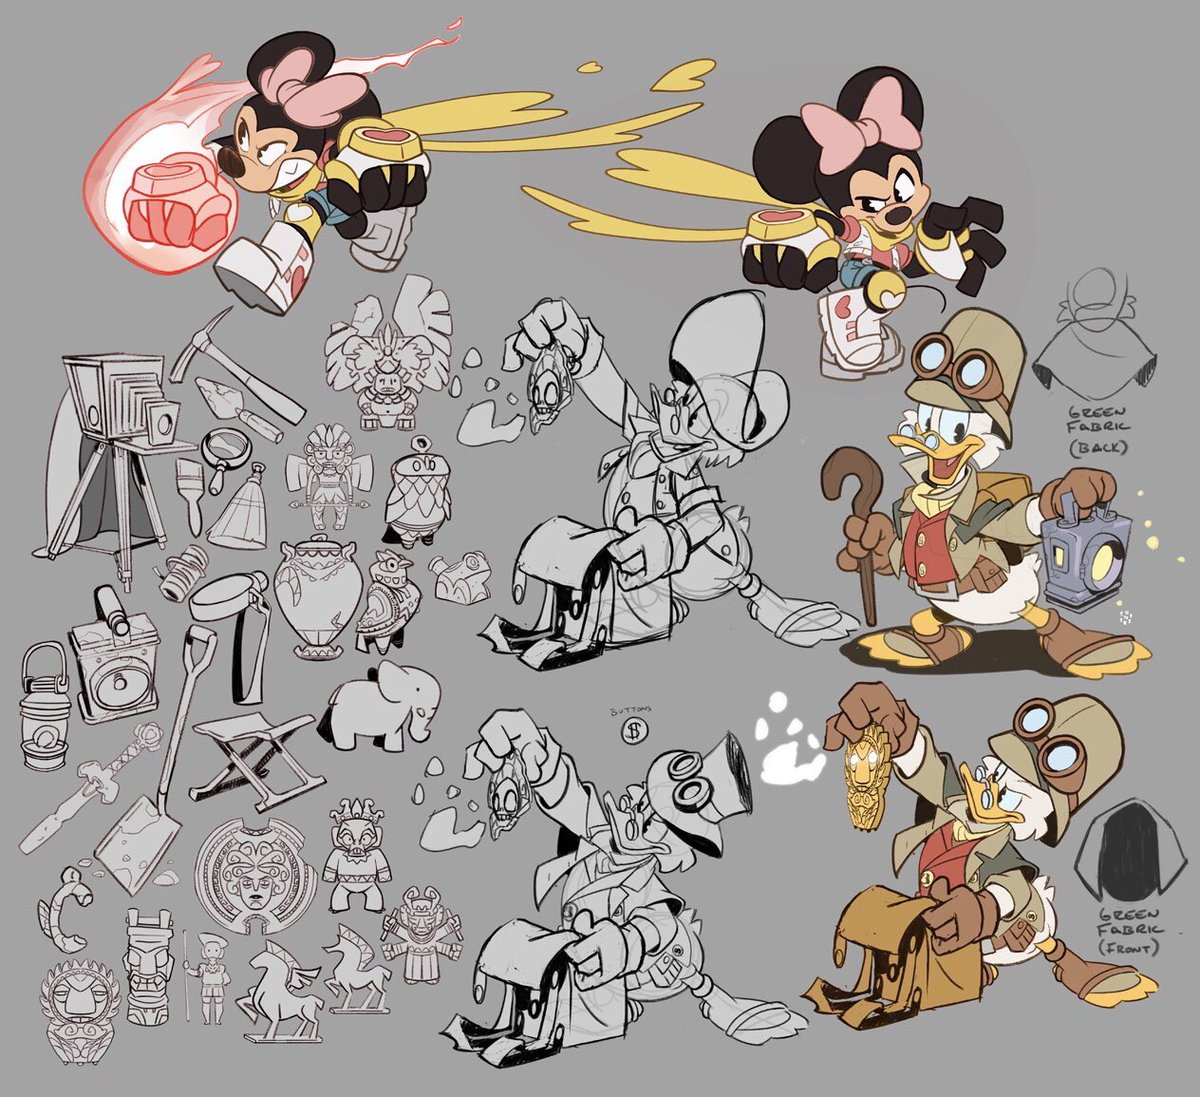 Apparently  @seangallowayart worked on this game and made the most badass version of Minnie Mouse in Disney history?!